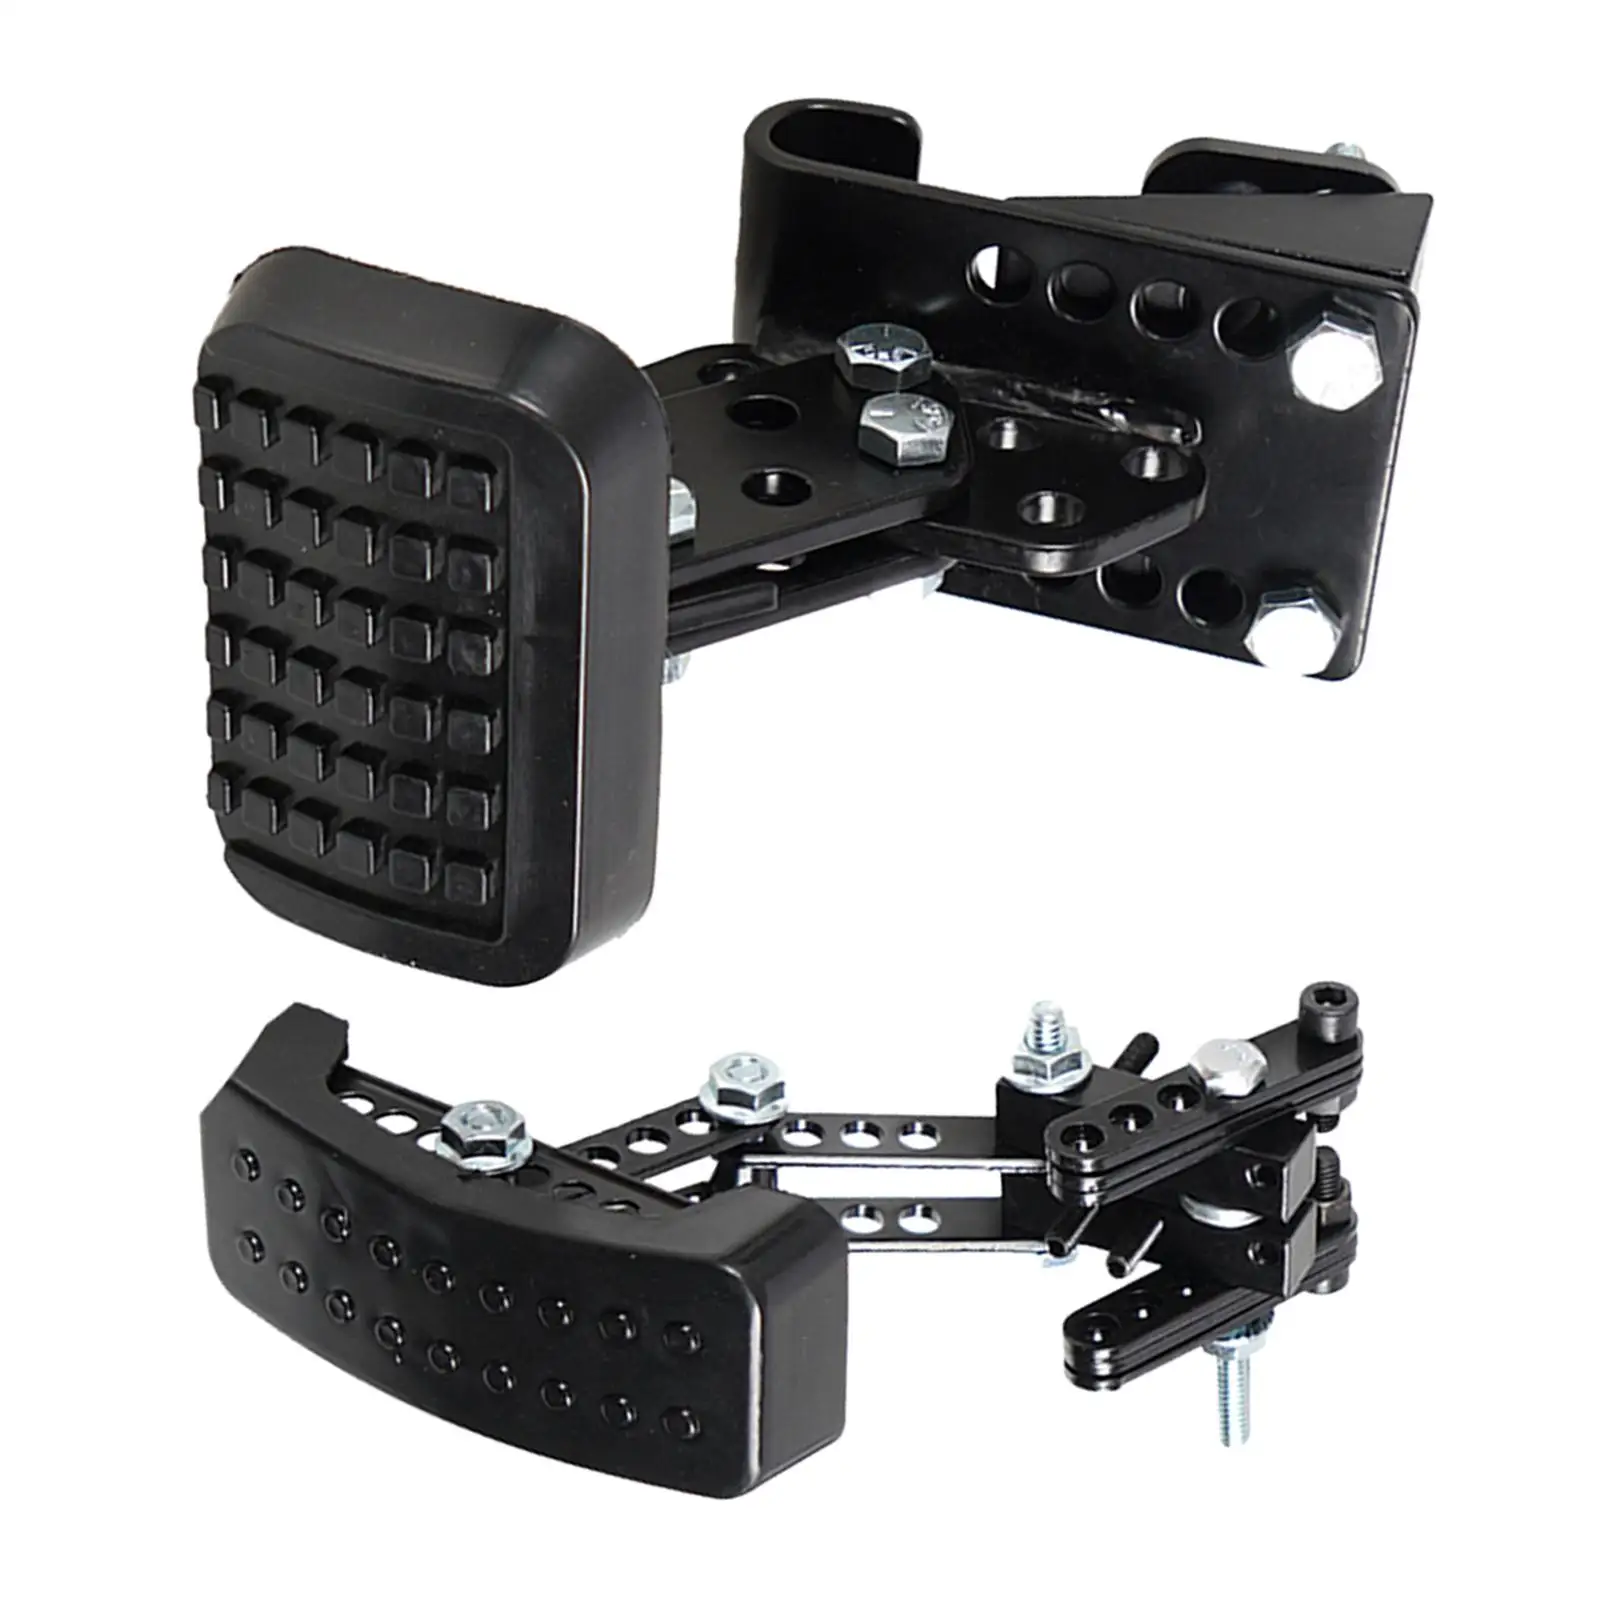 Brake and Pedals Extender Pedal Extension Enlarge Pedal Assembly for Short Drivers Accessories Replacement